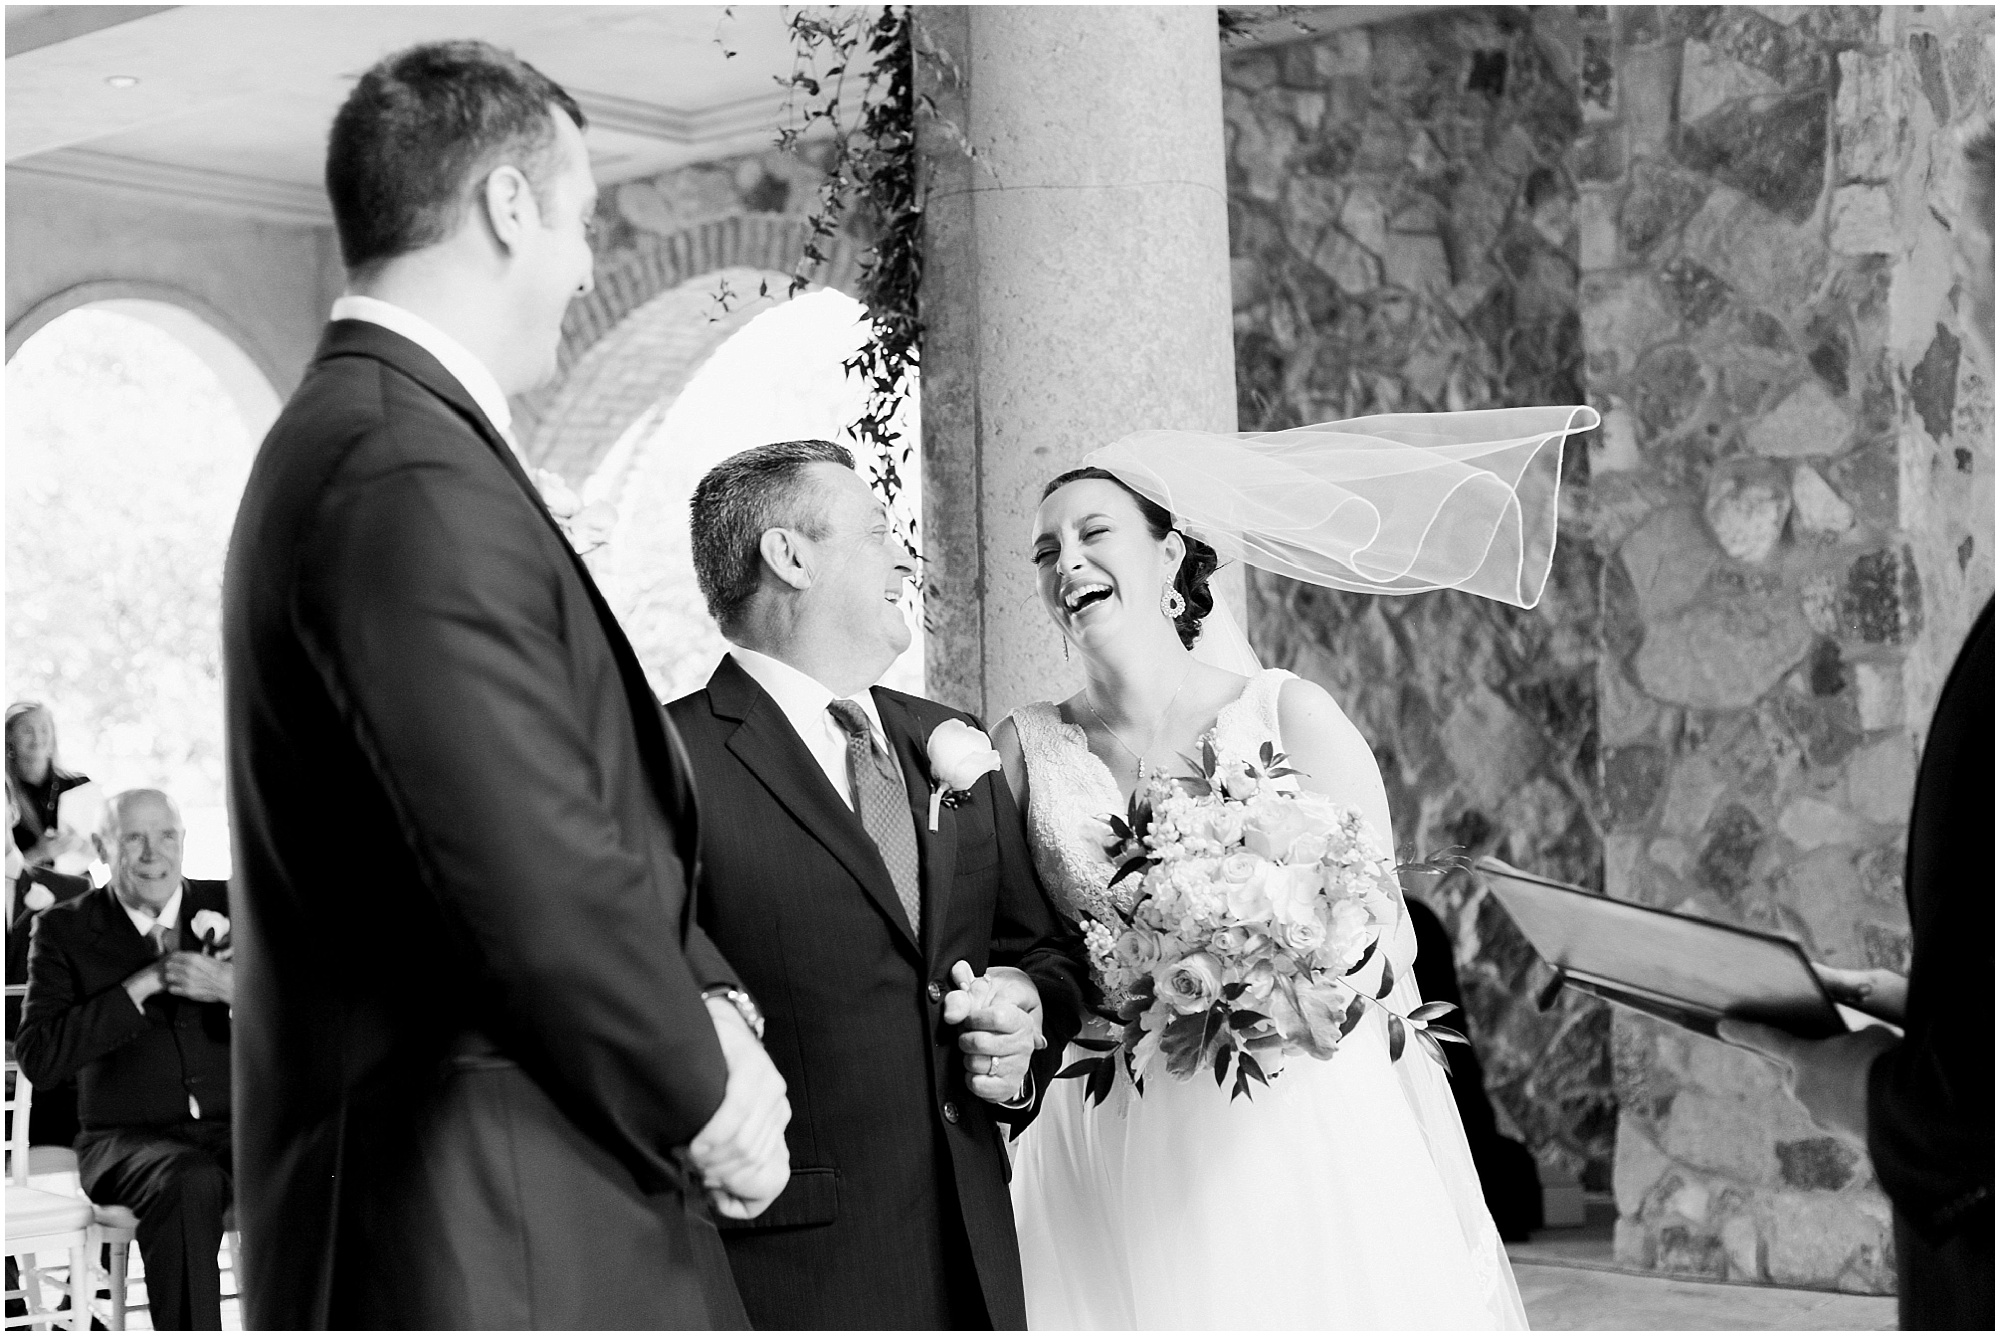 Father walking bride down the aisle laughing together at Intimate Italian wedding